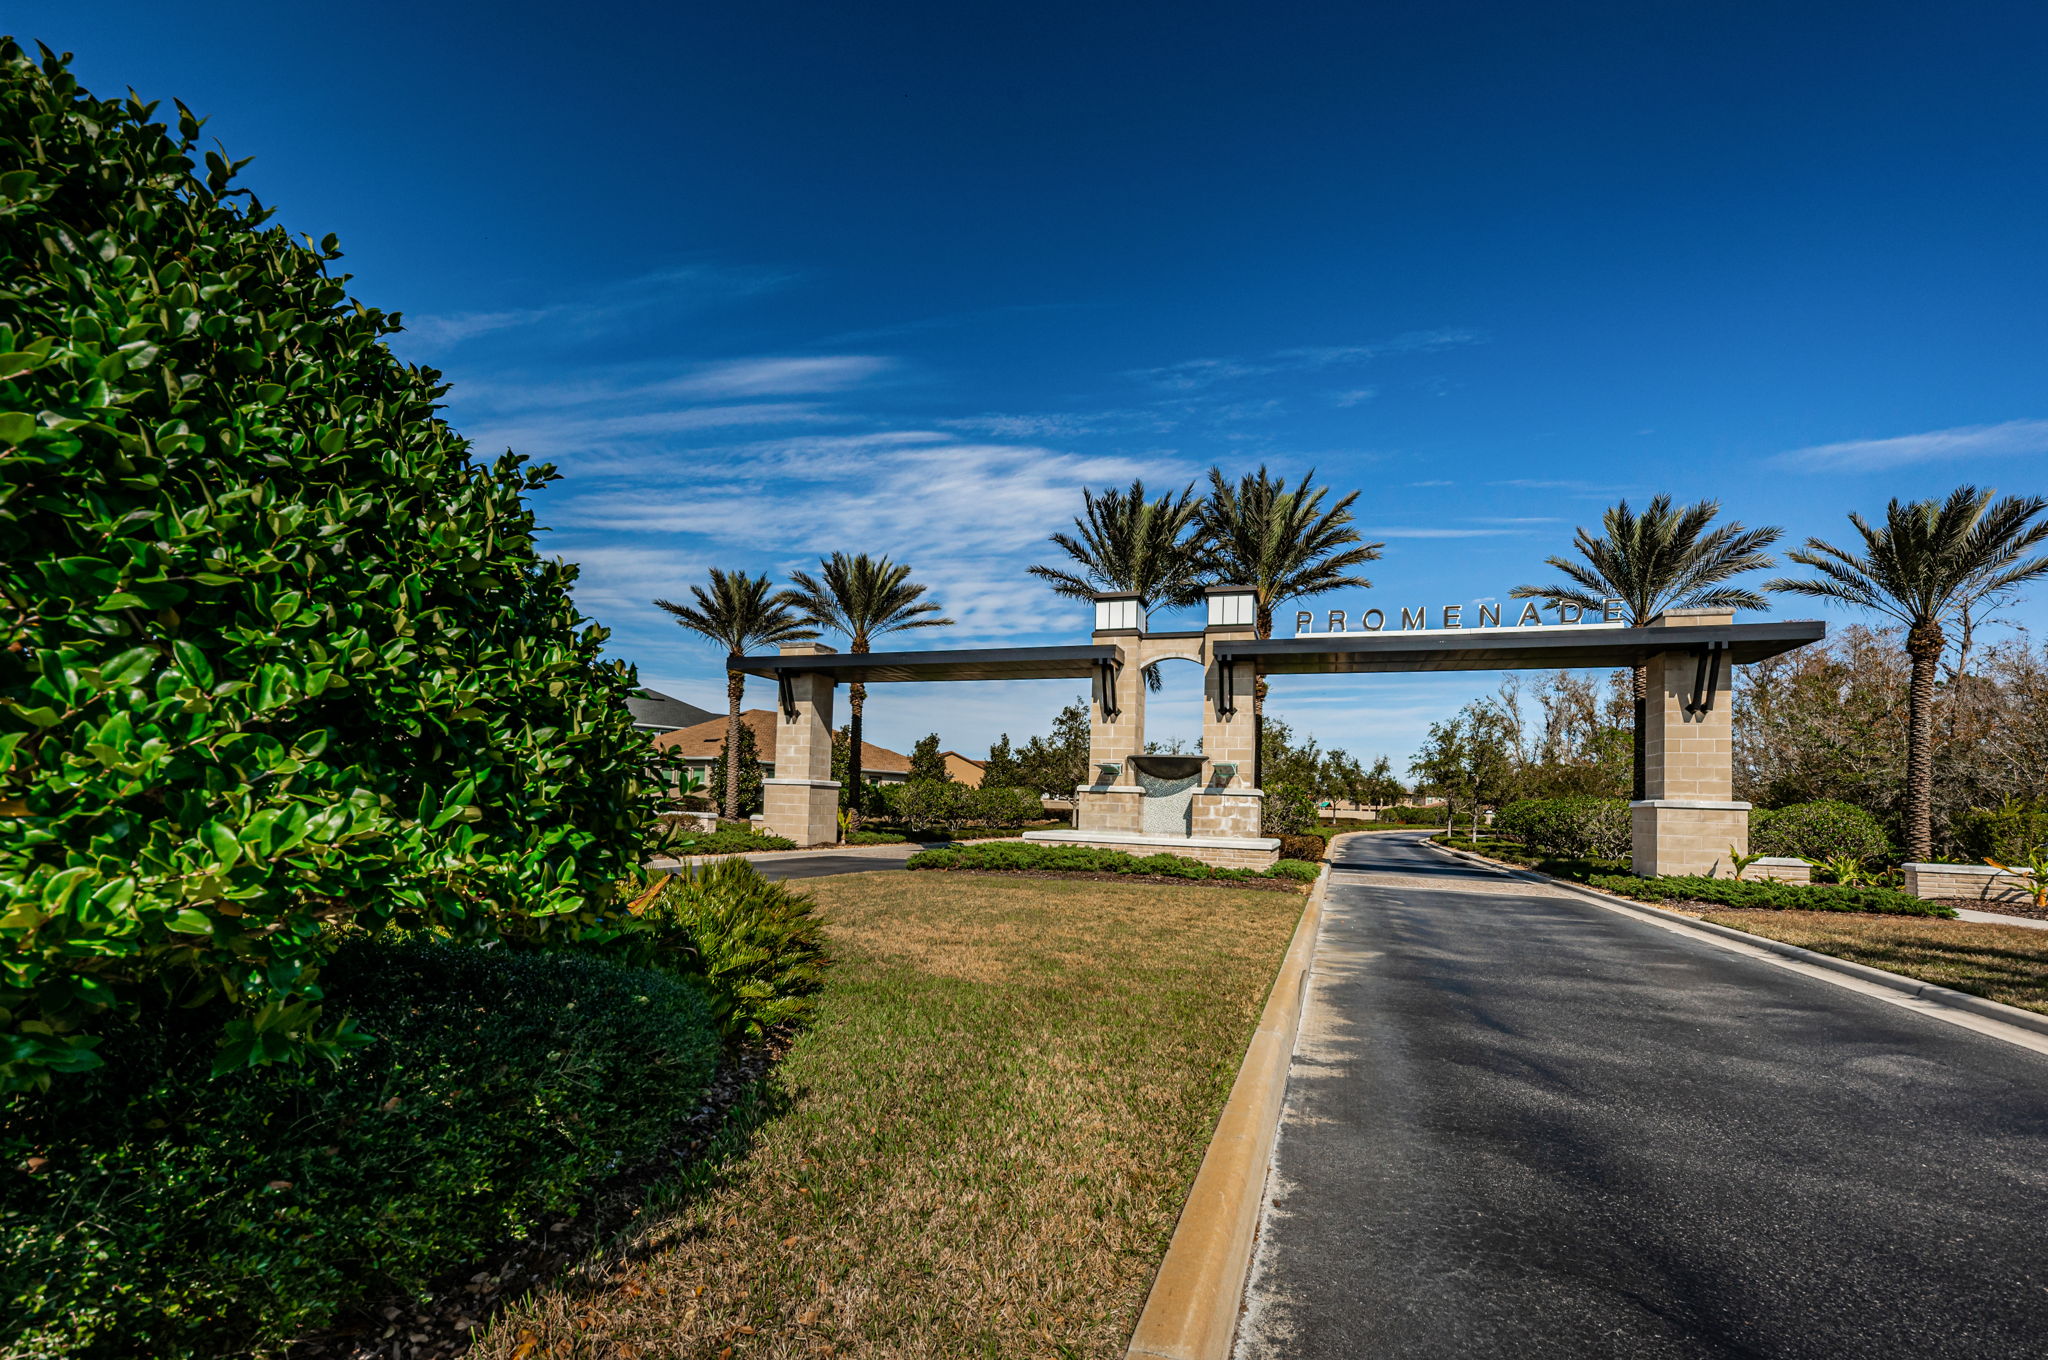 Gated Entry4